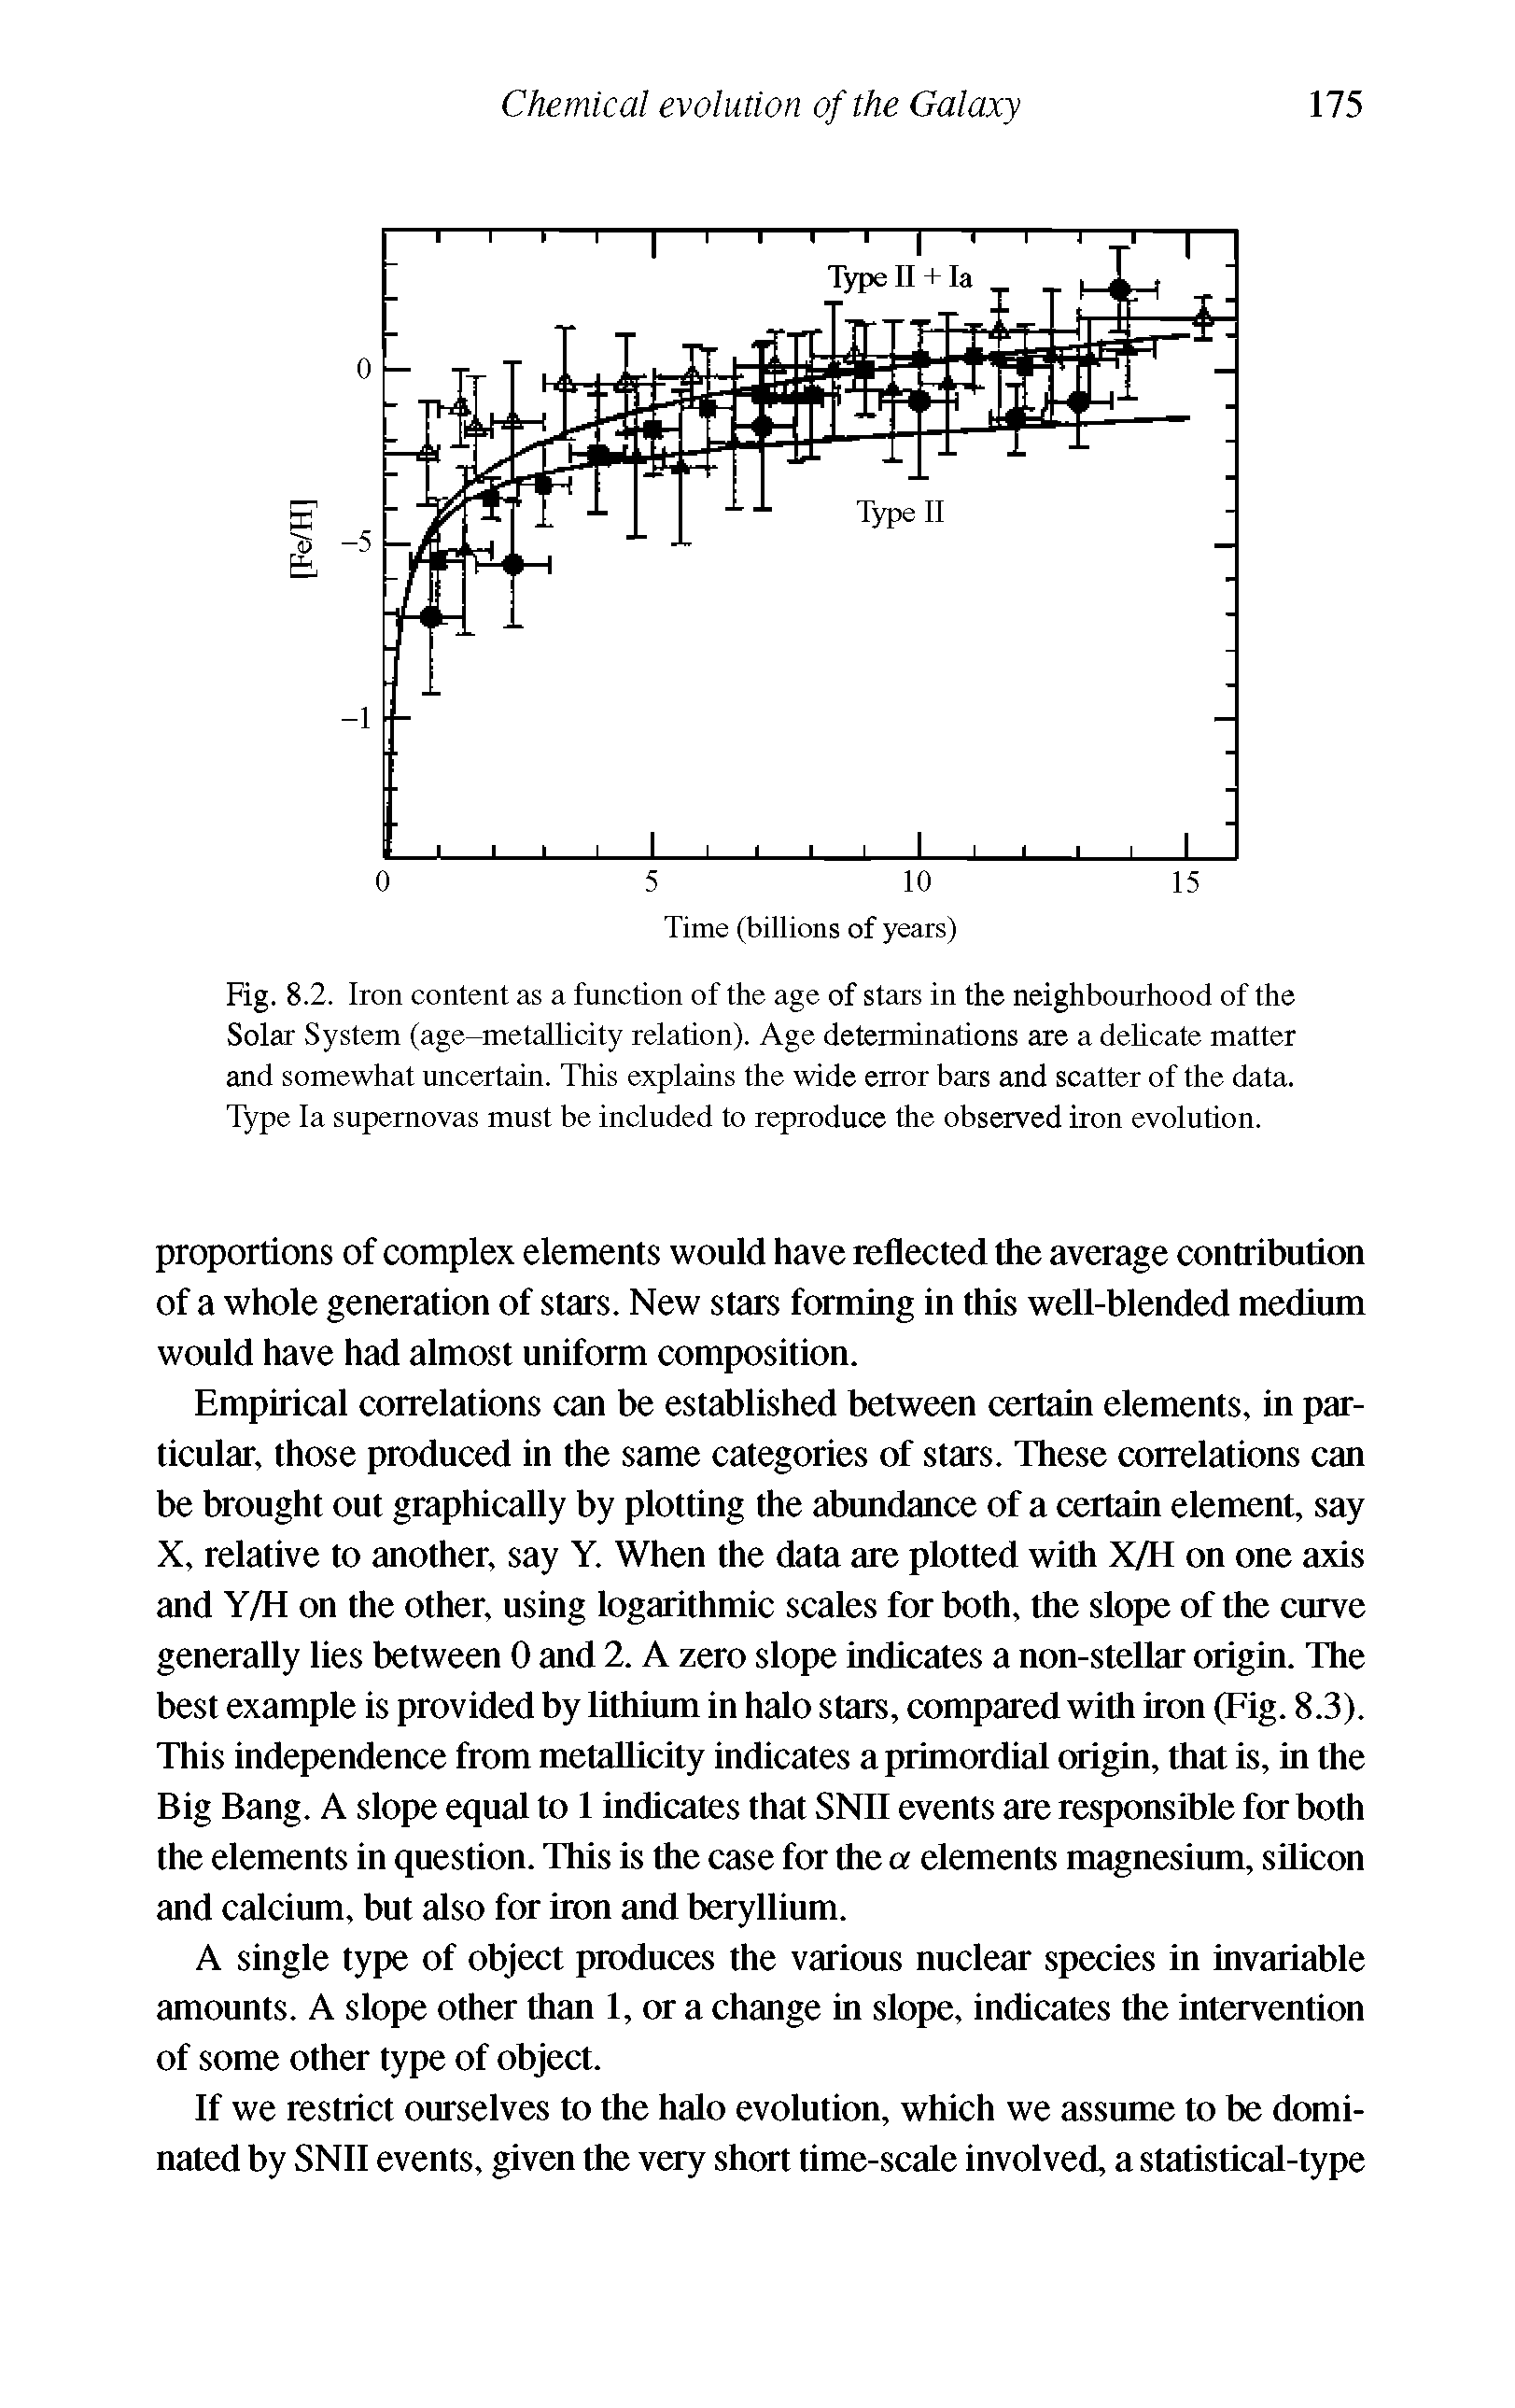 Fig. 8.2. Iron content as a function of the age of stars in the neighbourhood of the Solar System (age-metallicity relation). Age determinations are a dehcate matter and somewhat uncertain. This explains the wide error bars and scatter of the data. Type la supernovas must be included to reproduce the observed iron evolution.